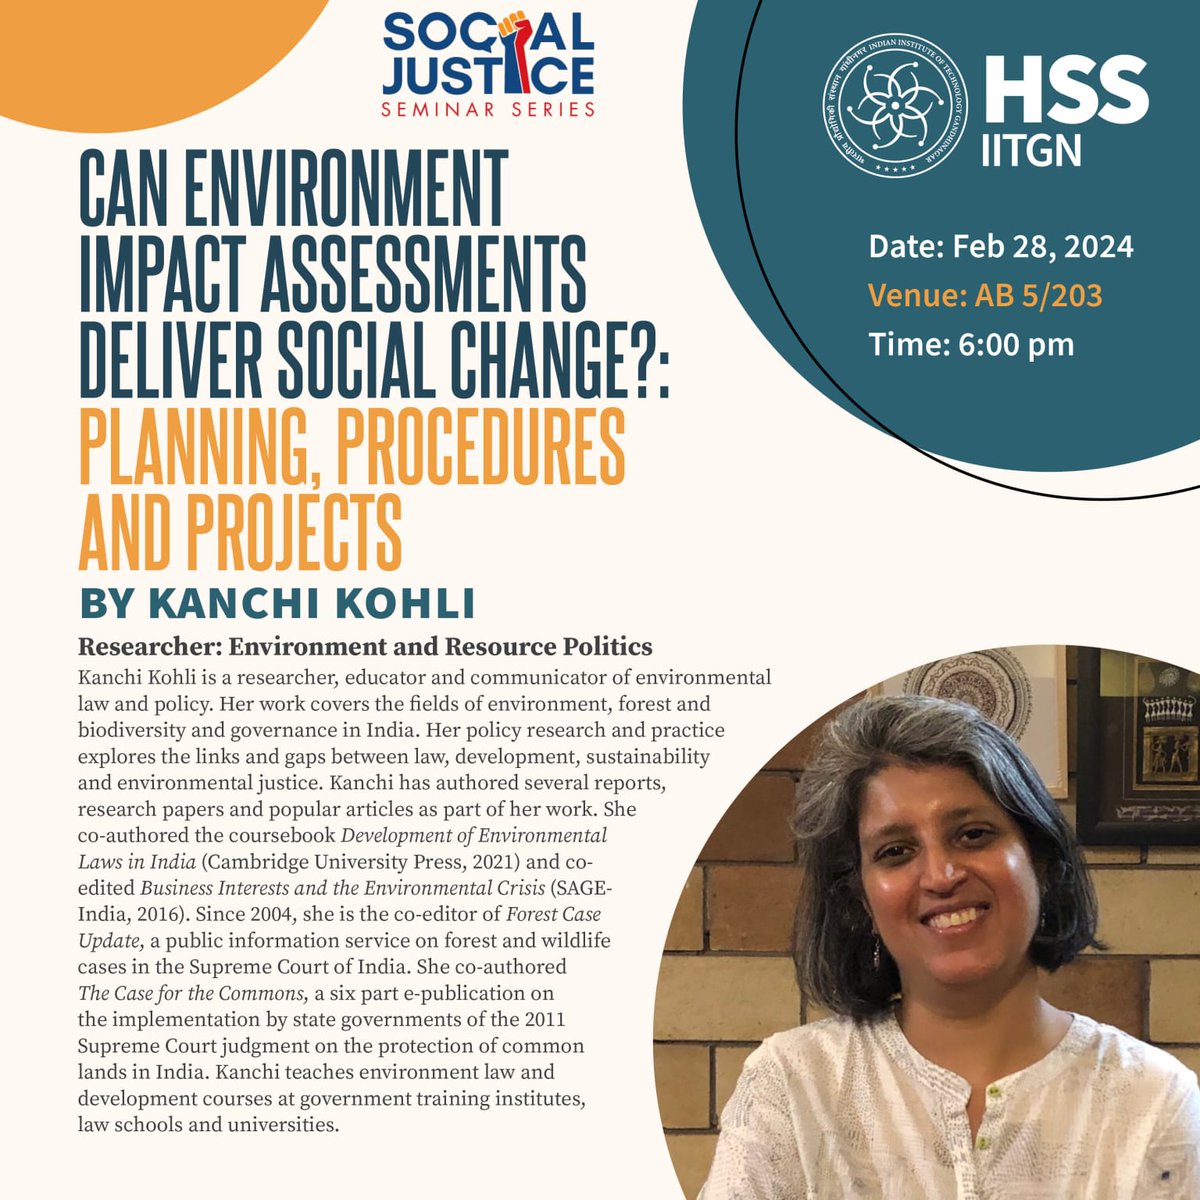 Social Justice Seminar Series announces the second event of the Semester featuring Kanchi Kohli, who will be delivering a lecture on 'Can Environment Impact Assessments Deliver Social Change?: Planning, Procedures And Projects'. Venue: AB5/203 Date and Time: Feb 28, 6:00 PM.